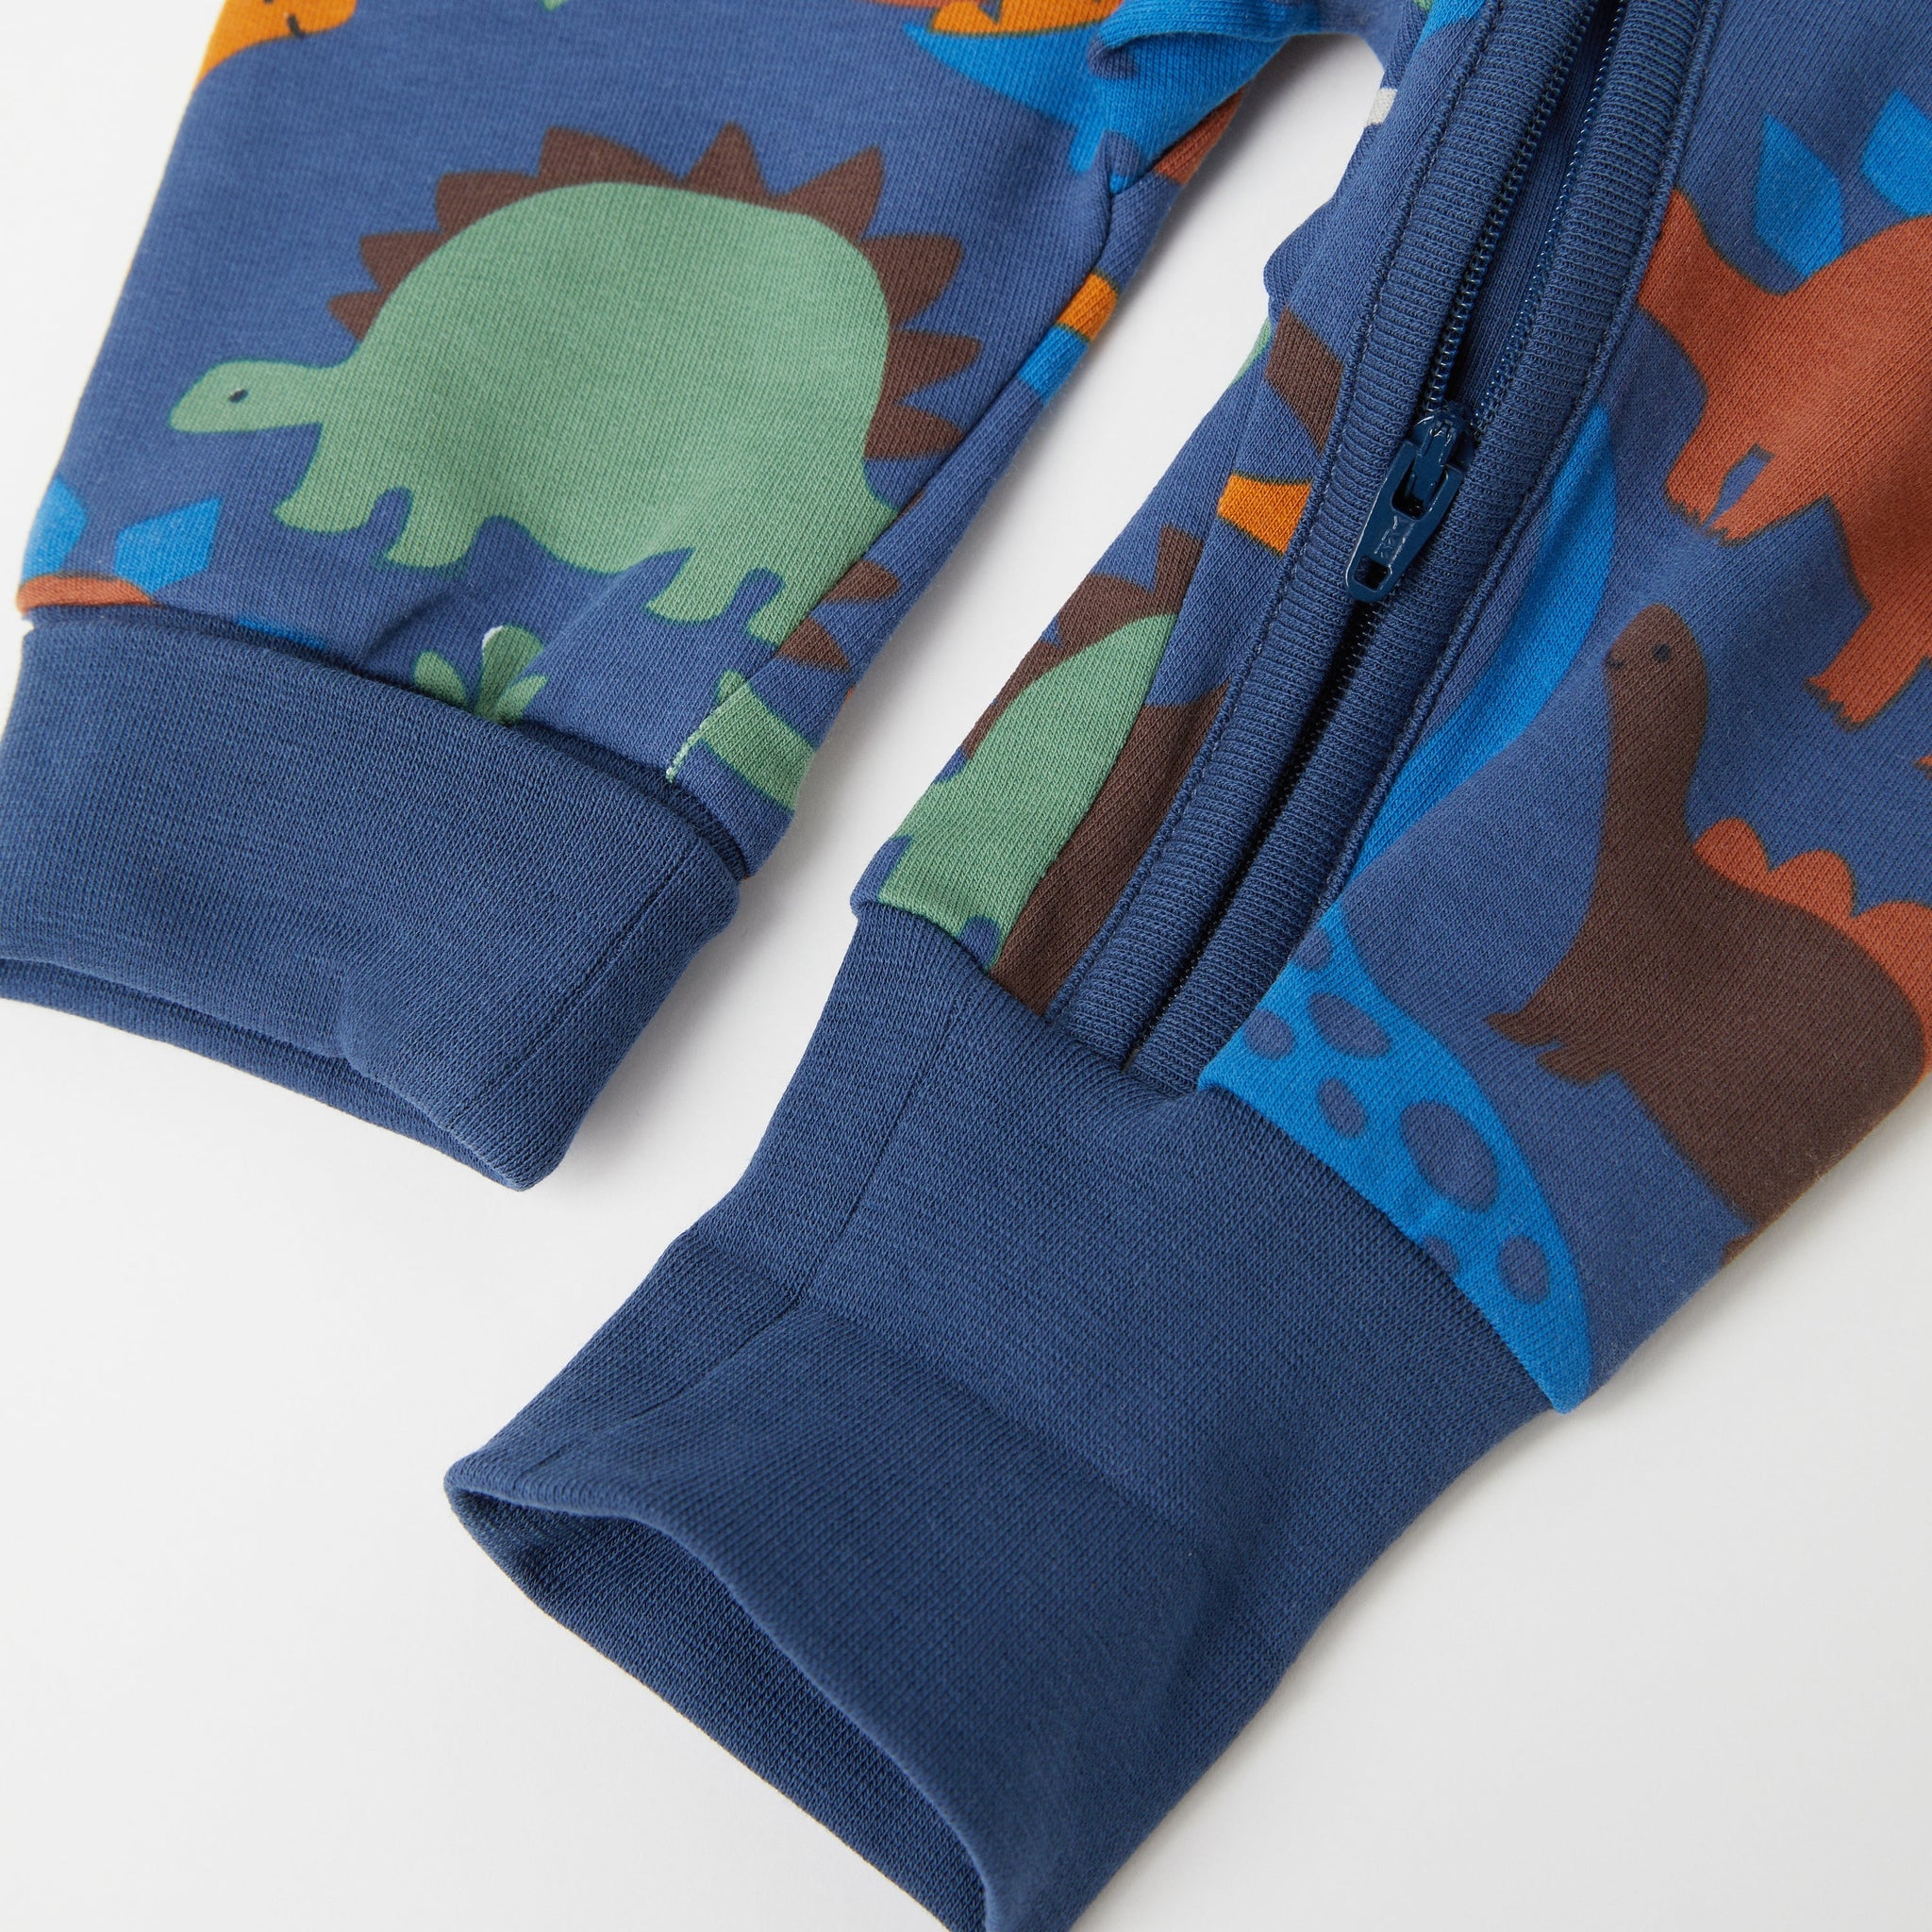 Dinosaur Print Blue Baby Romper from the Polarn O. Pyret Kidswear collection. Ethically produced kids clothing.